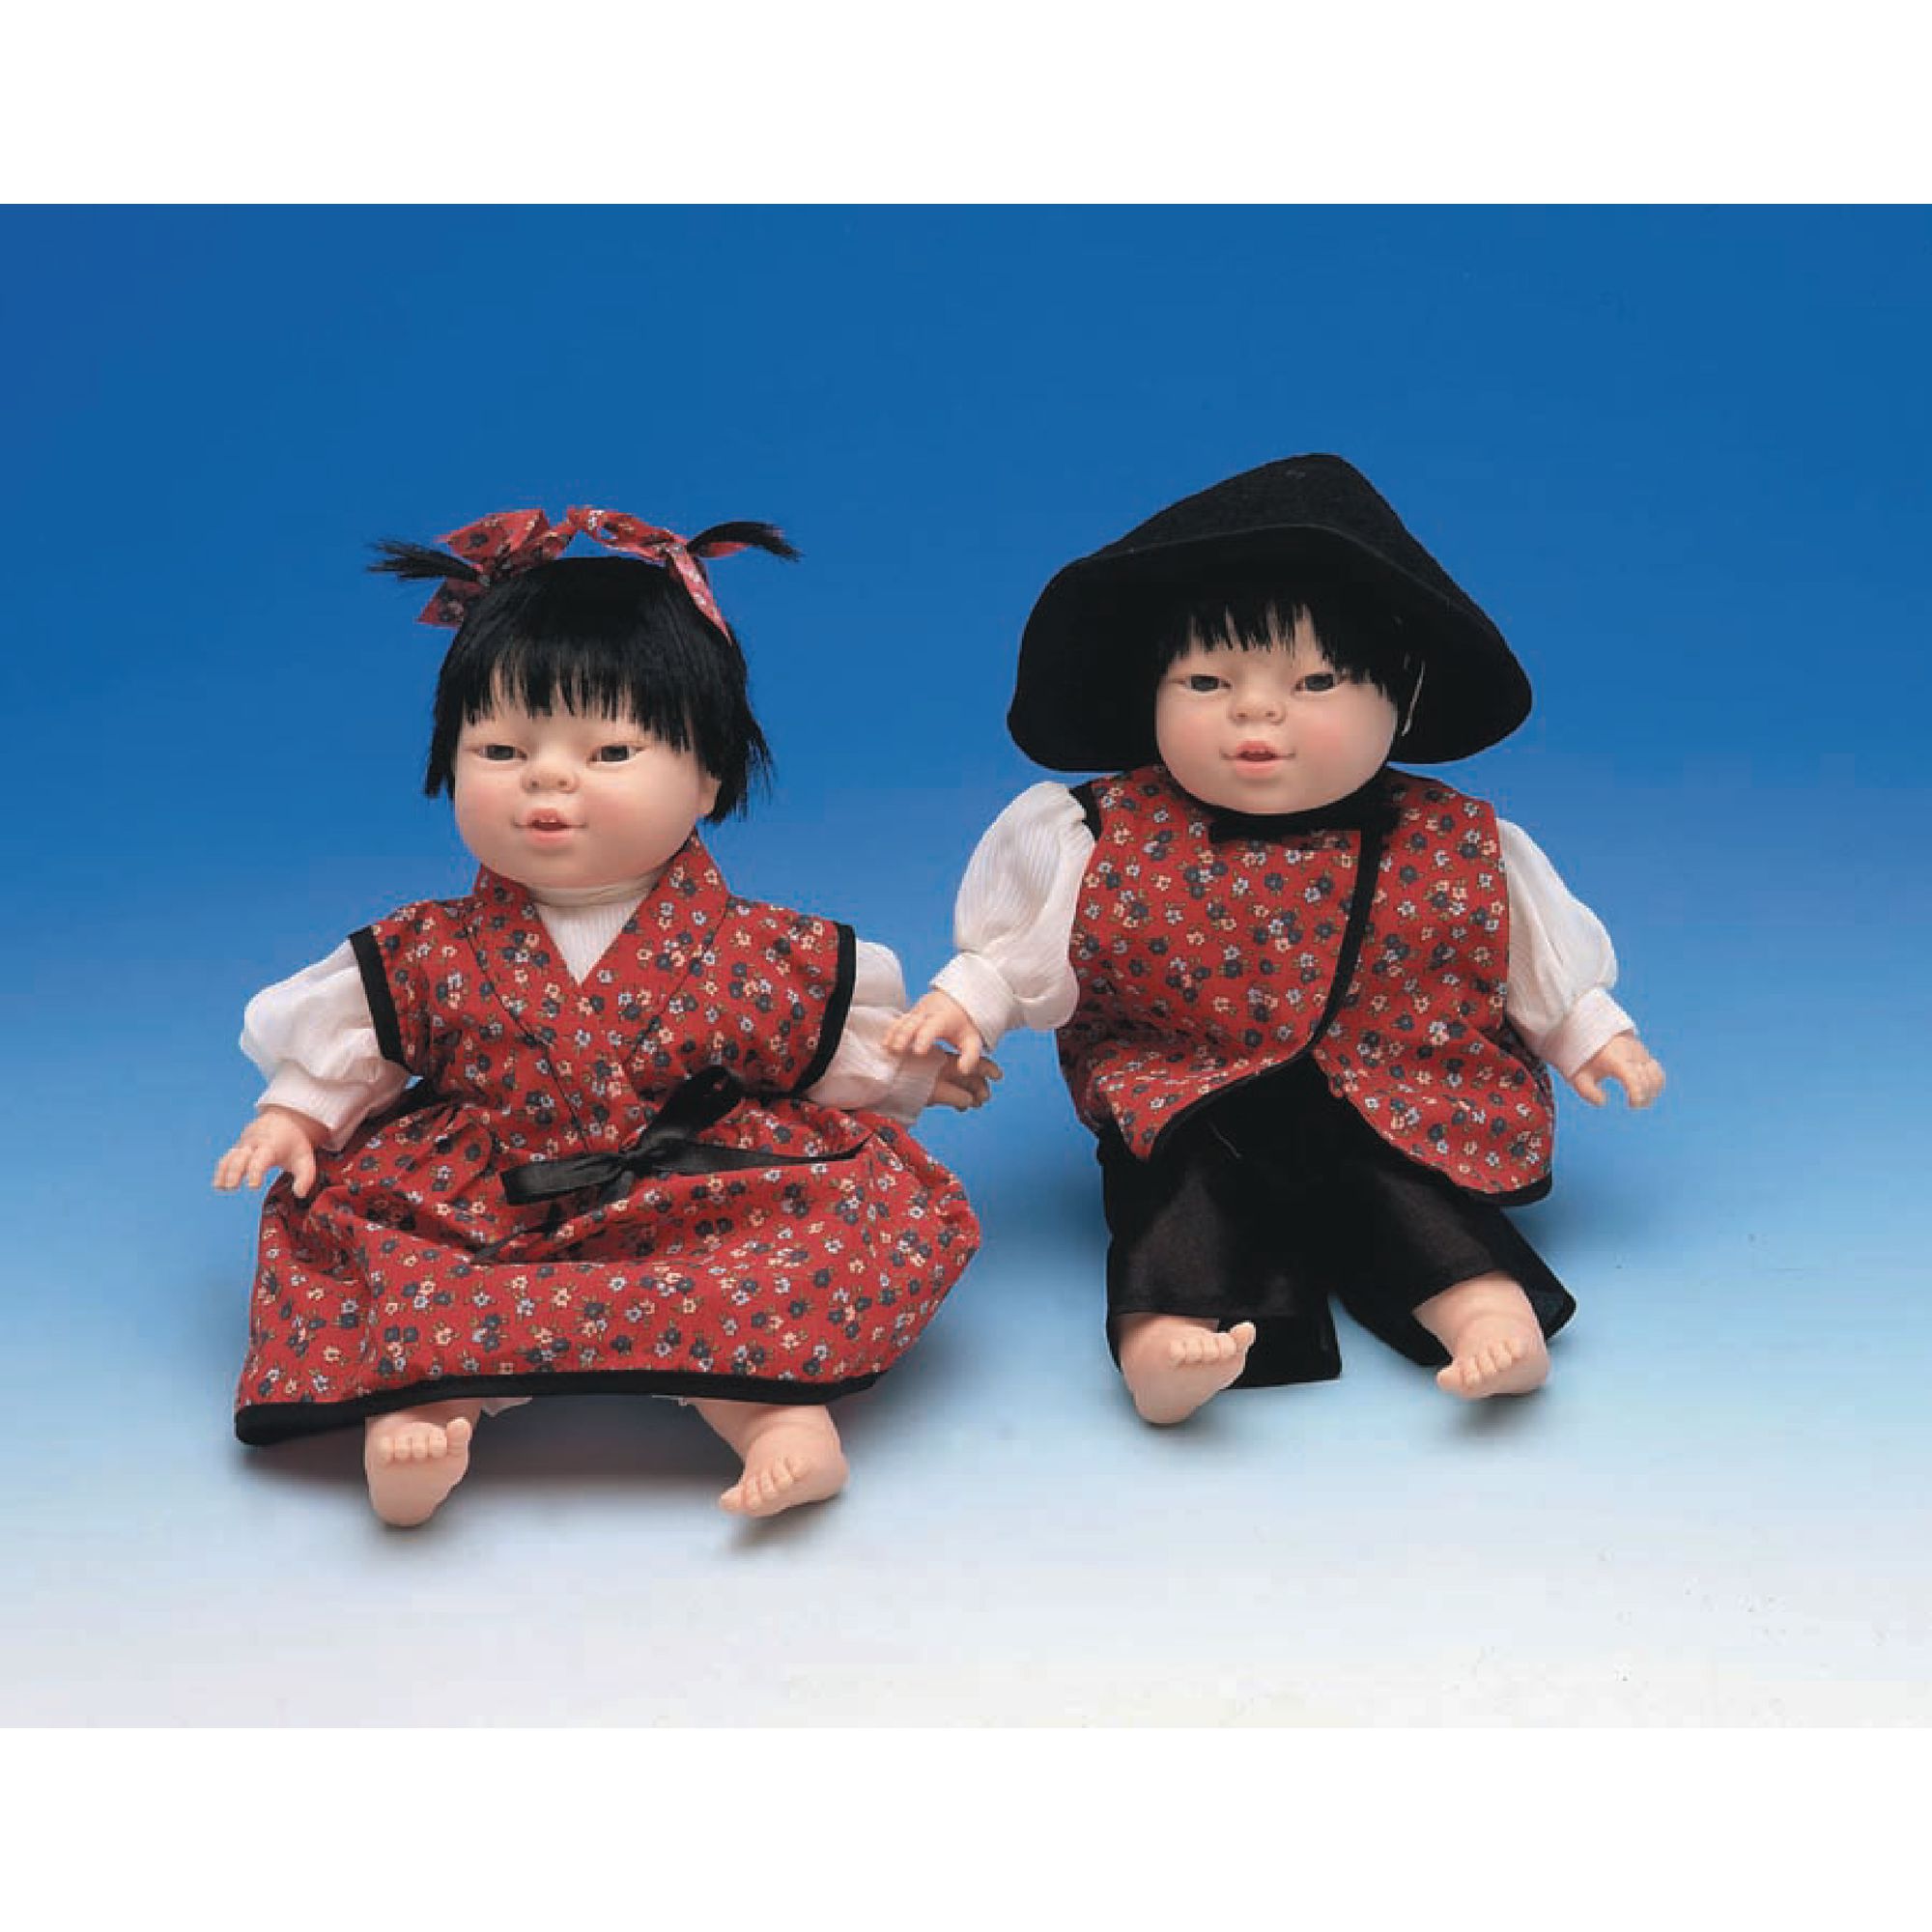 SoftBodied Doll Offer - Oriental